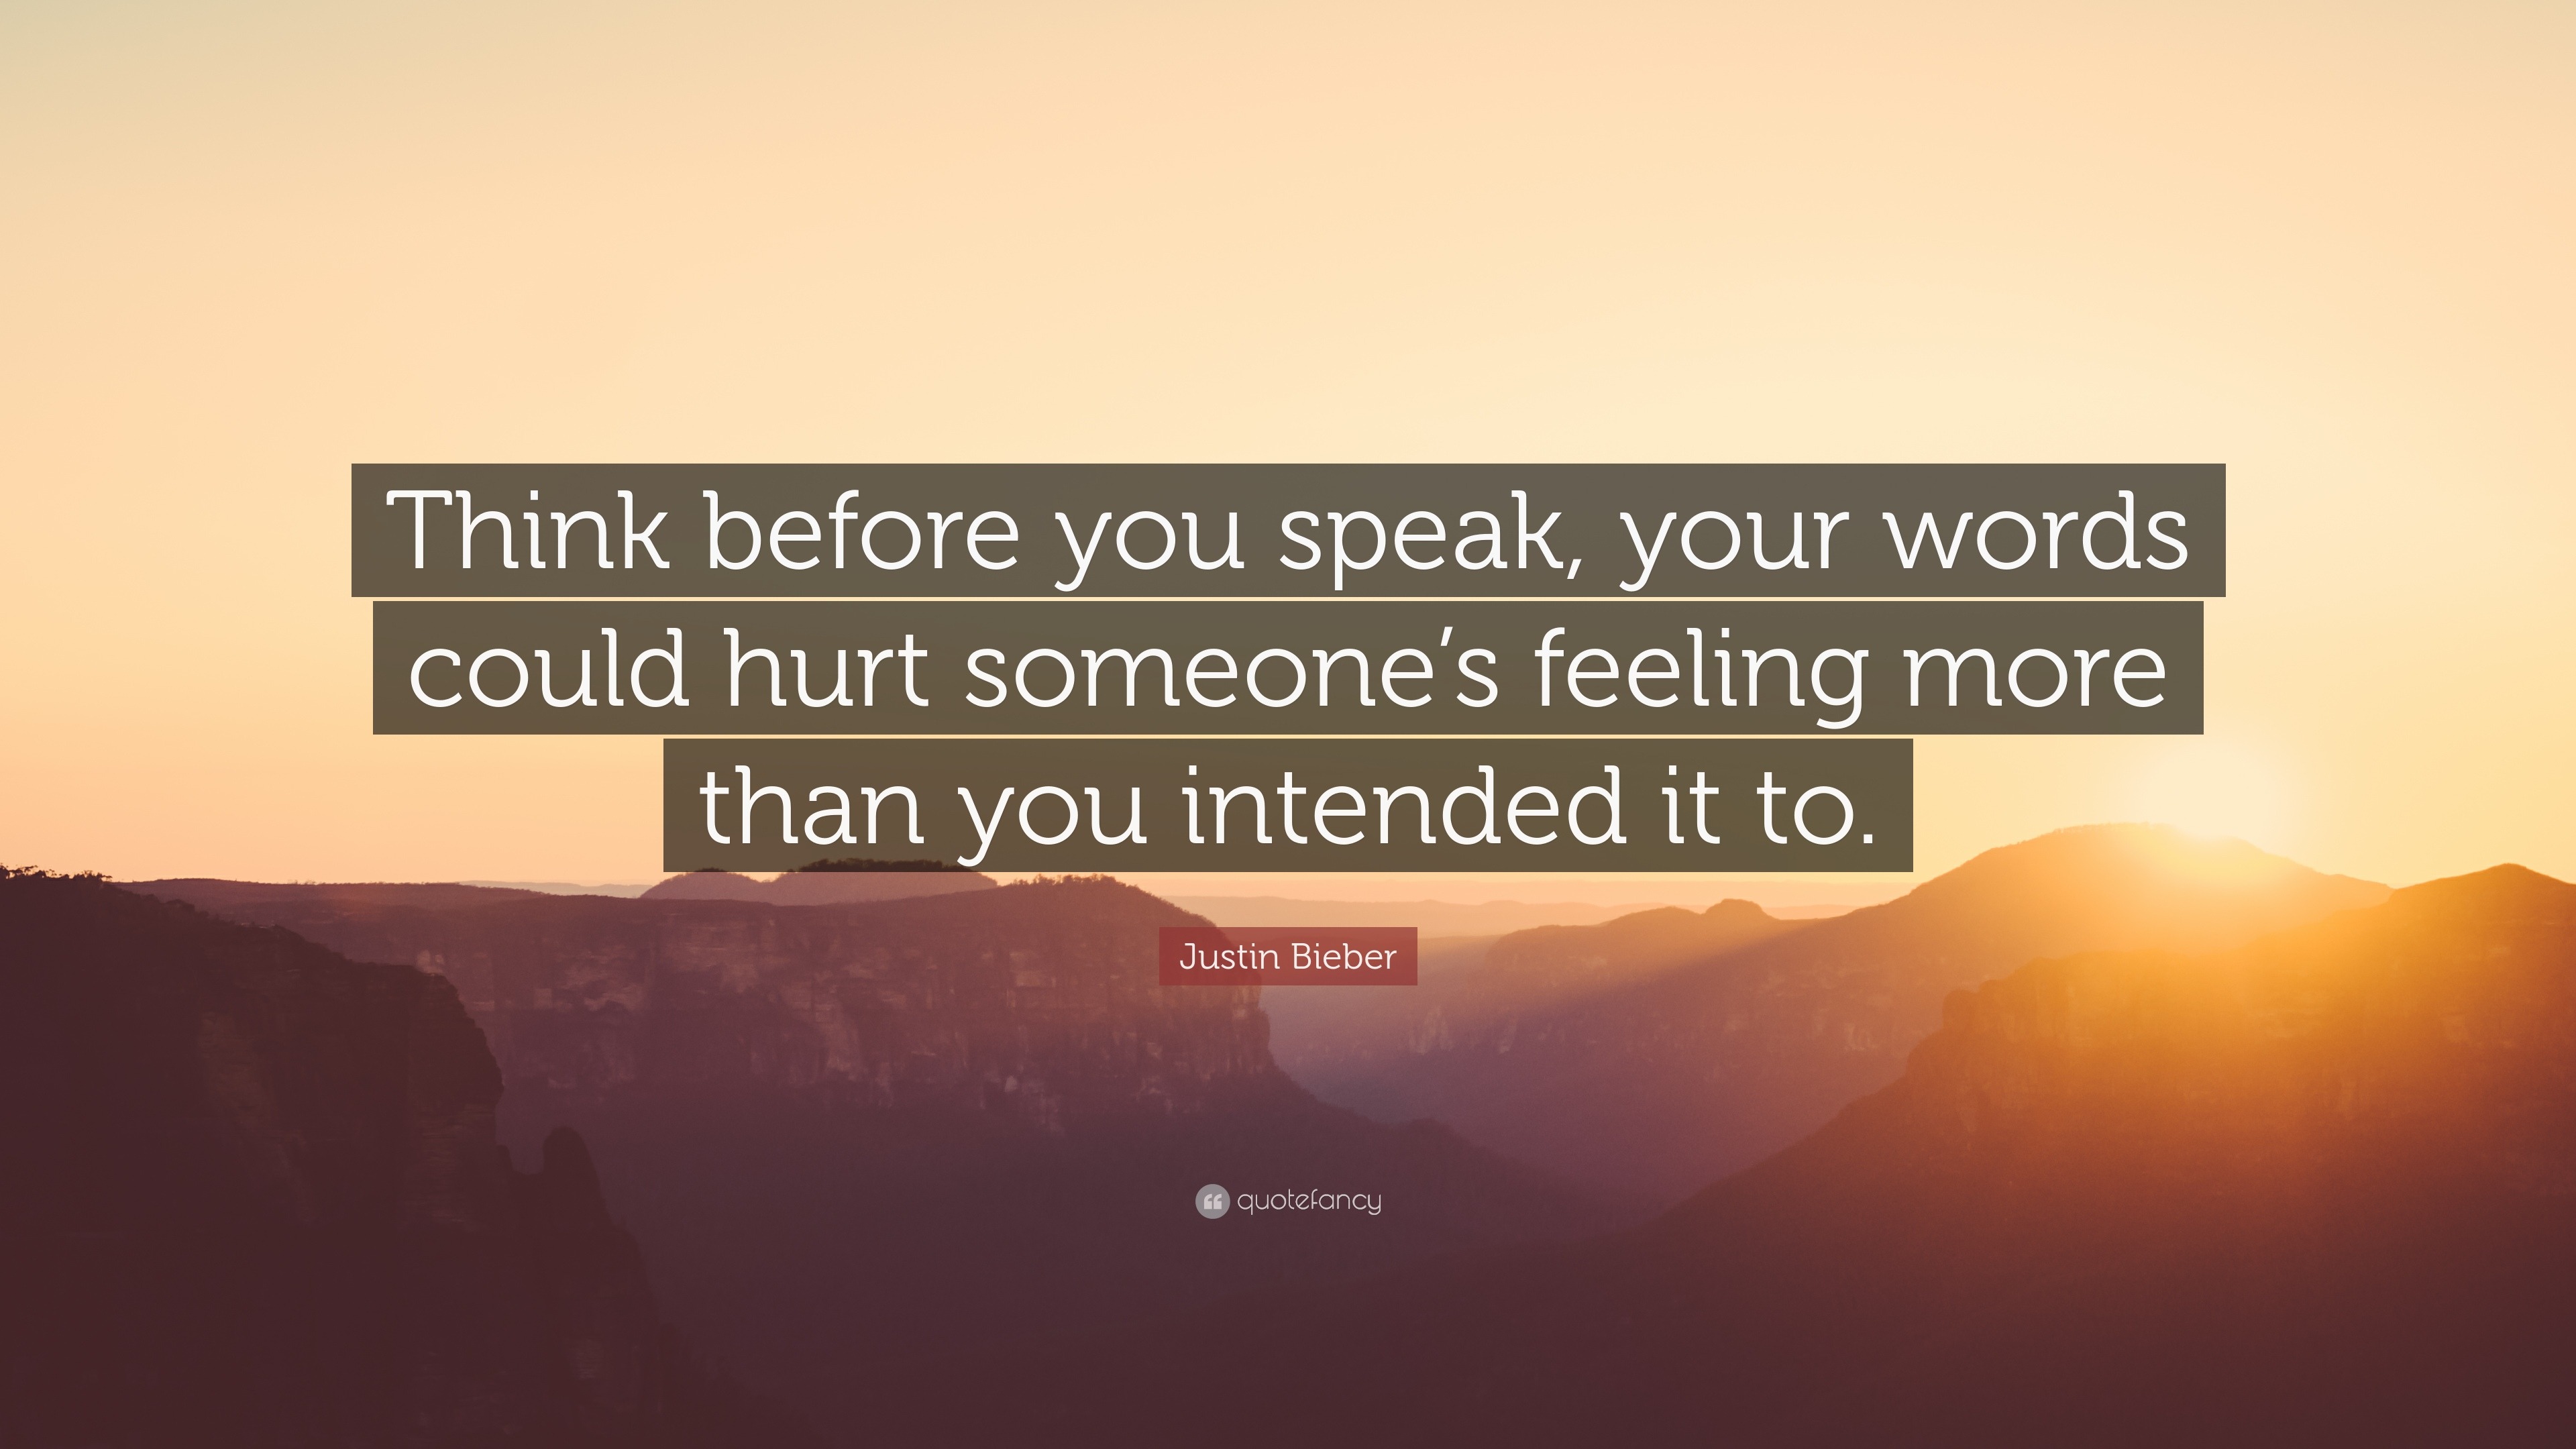 Think before you speak, your words could hurt someoneâ€™s feeling more than y...